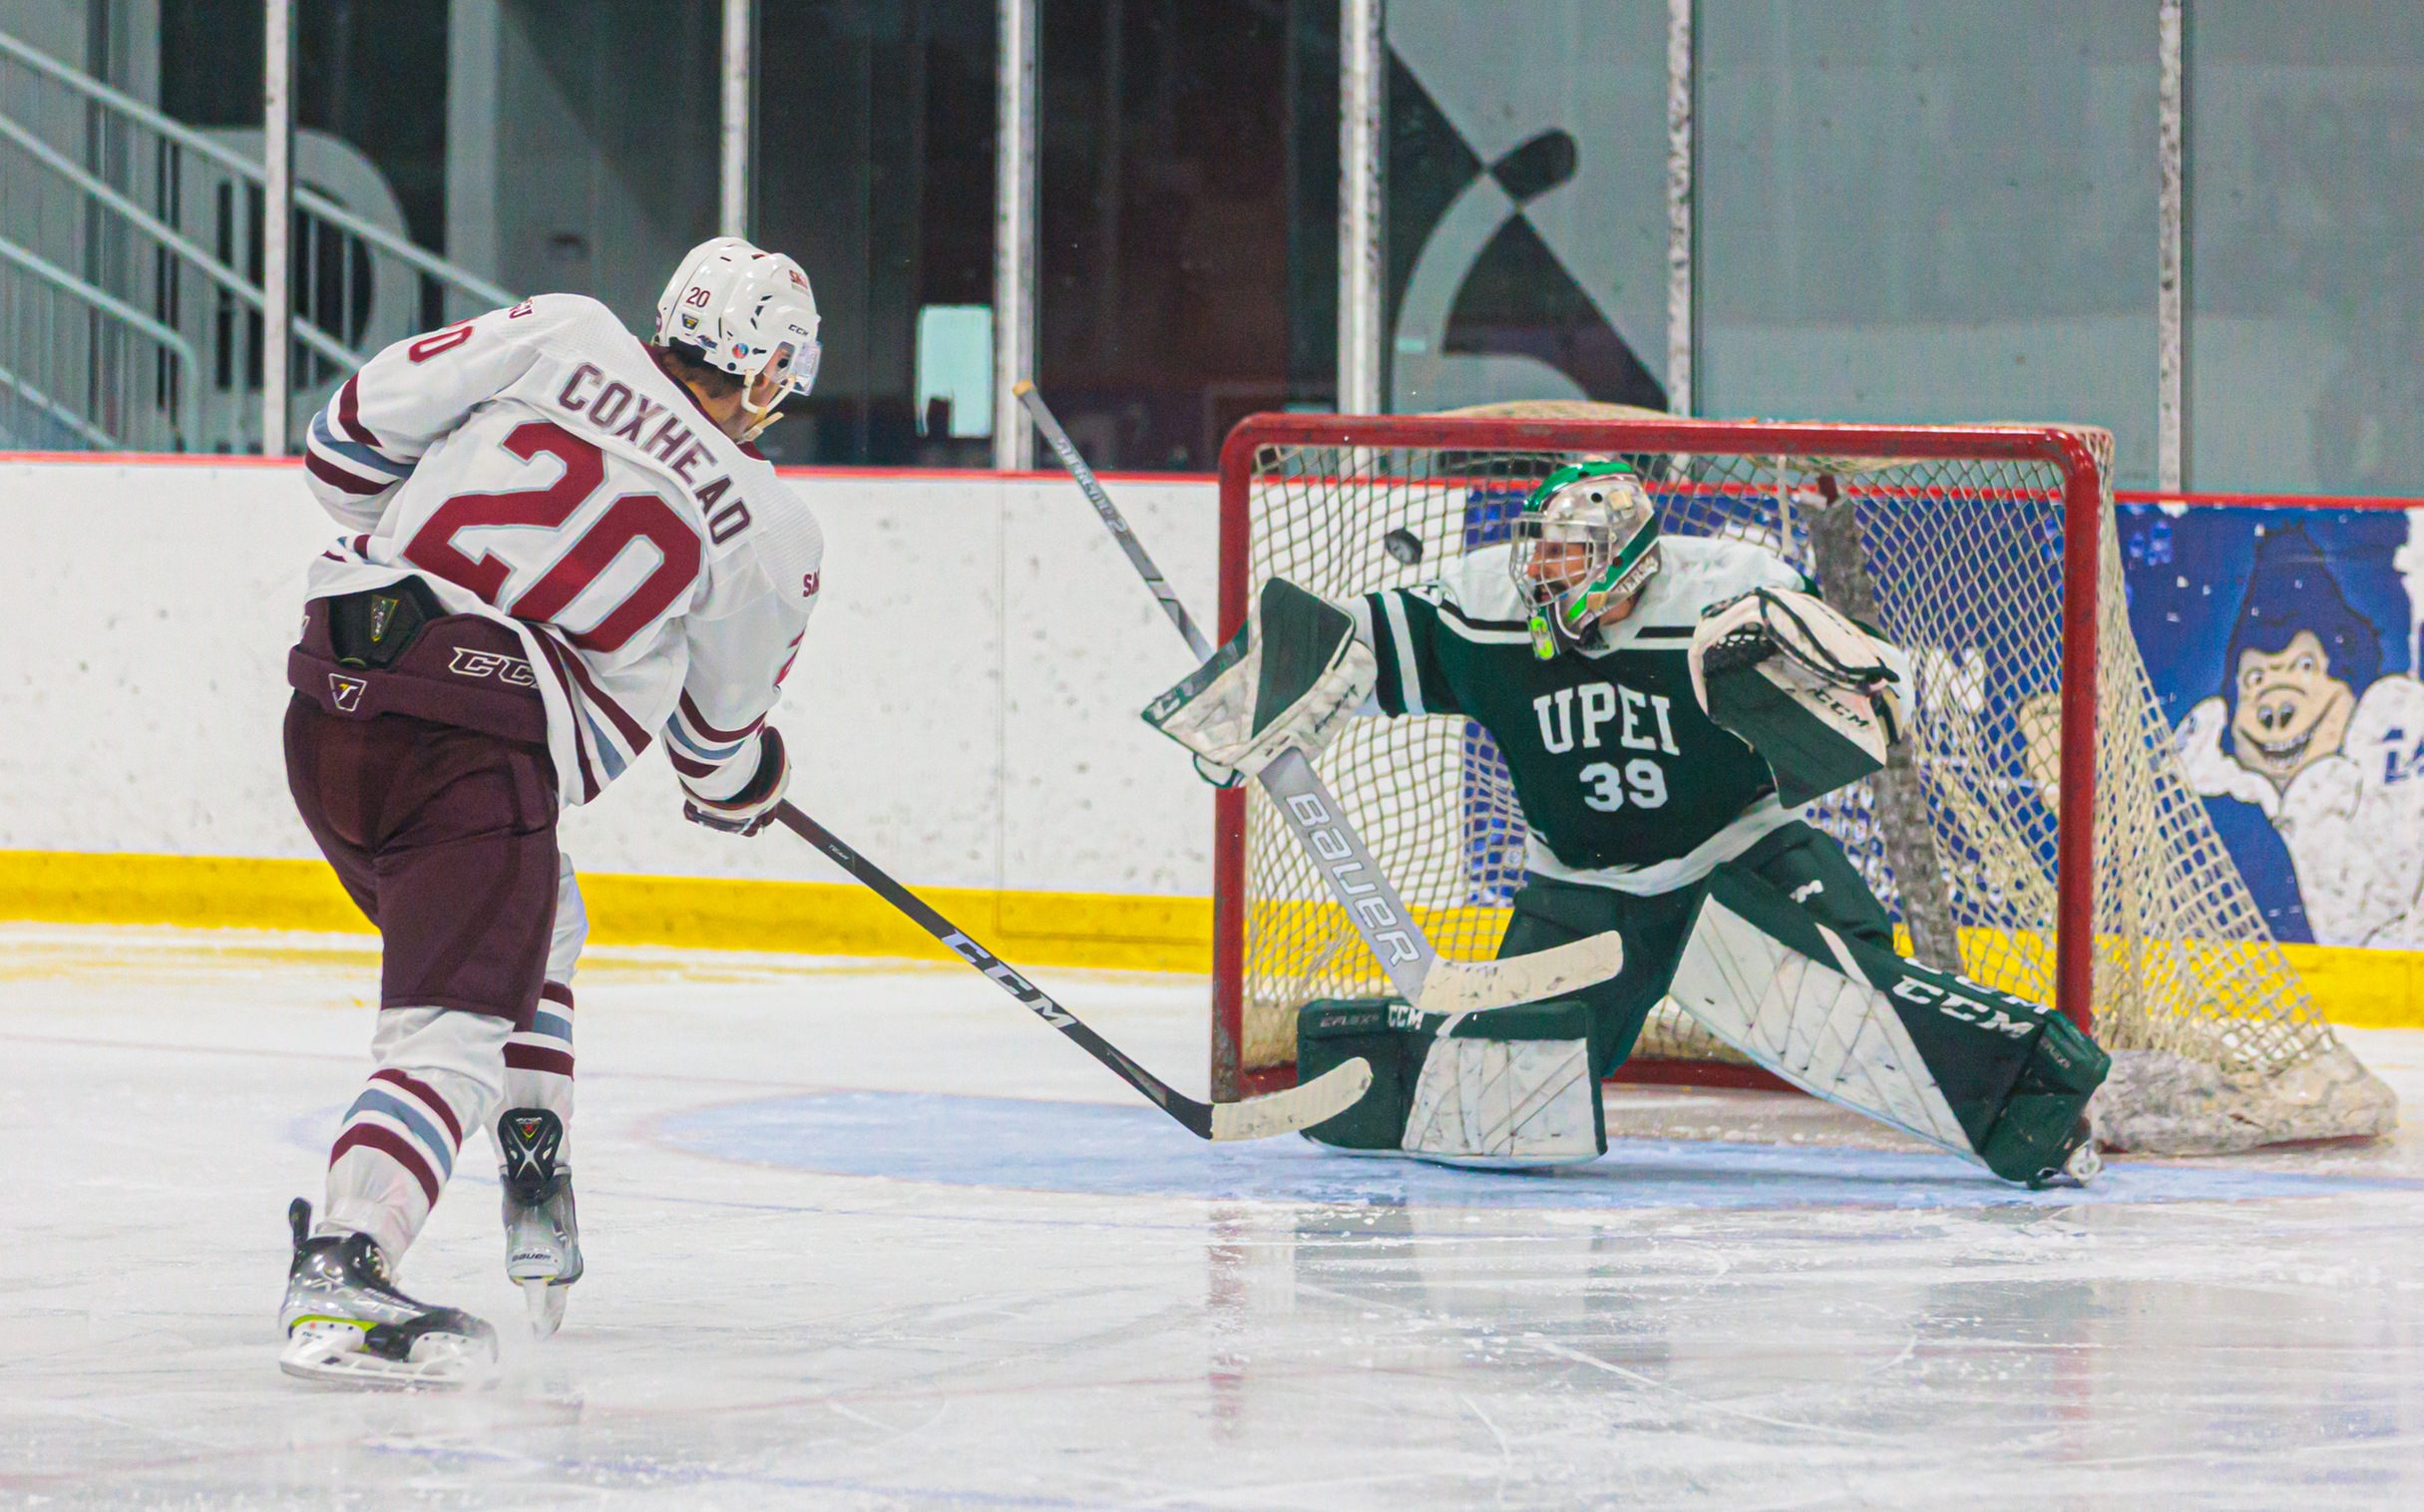 Capriotti shines in goal as Panthers defeat Huskies 2-1